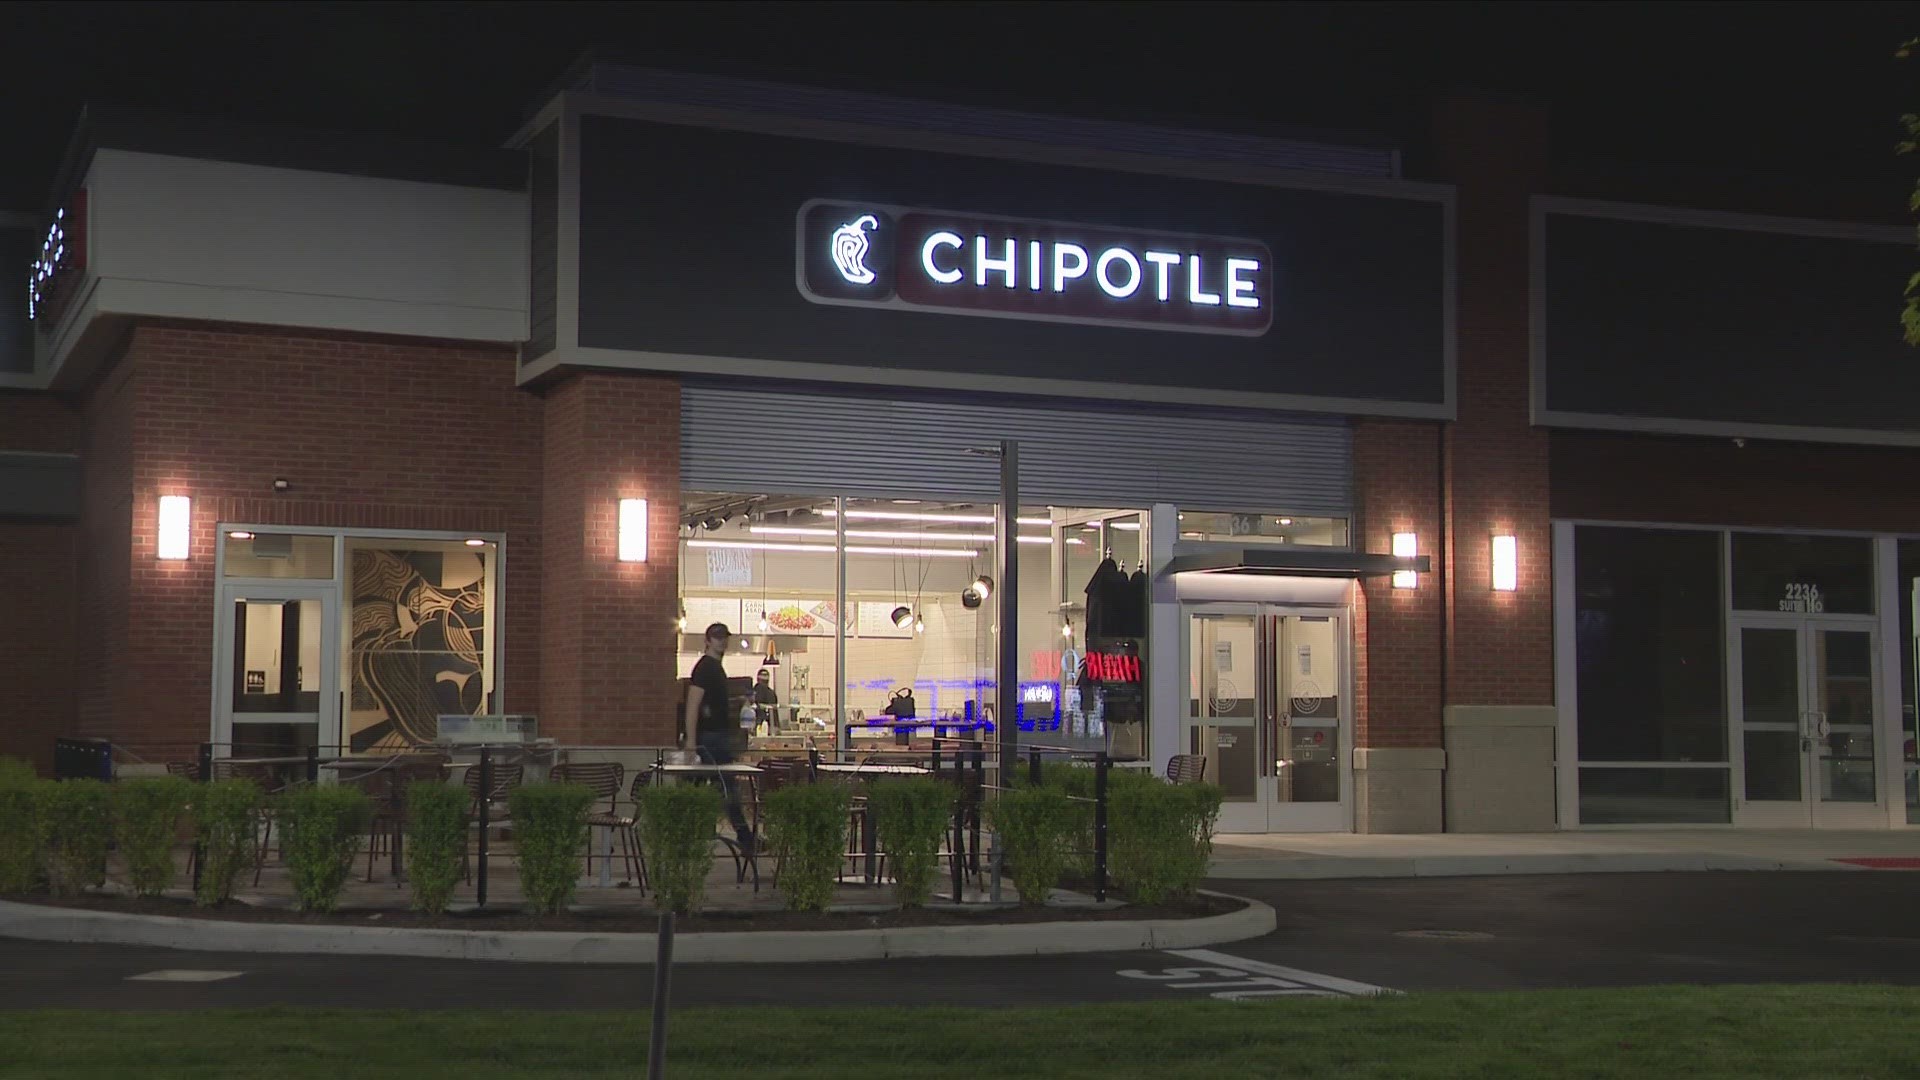 The location will also have a Chipotlane, which the company describes as "a drive-thru pickup lane that allows guests to conveniently pick up digital orders."